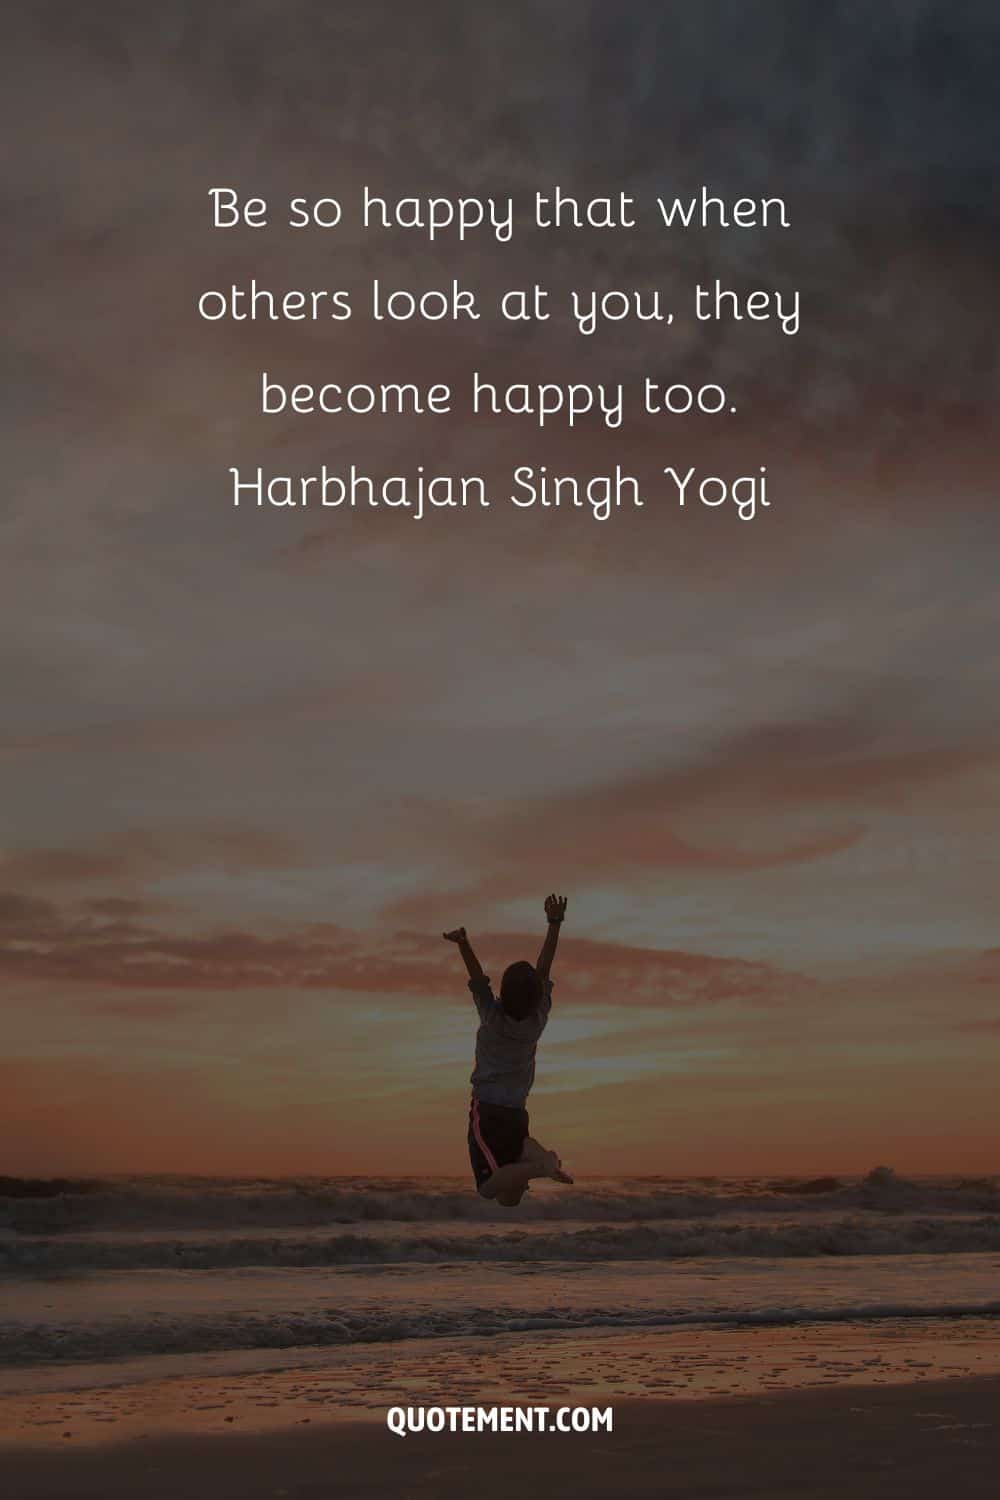 Be so happy that when others look at you, they become happy too. – Harbhajan Singh Yogi.